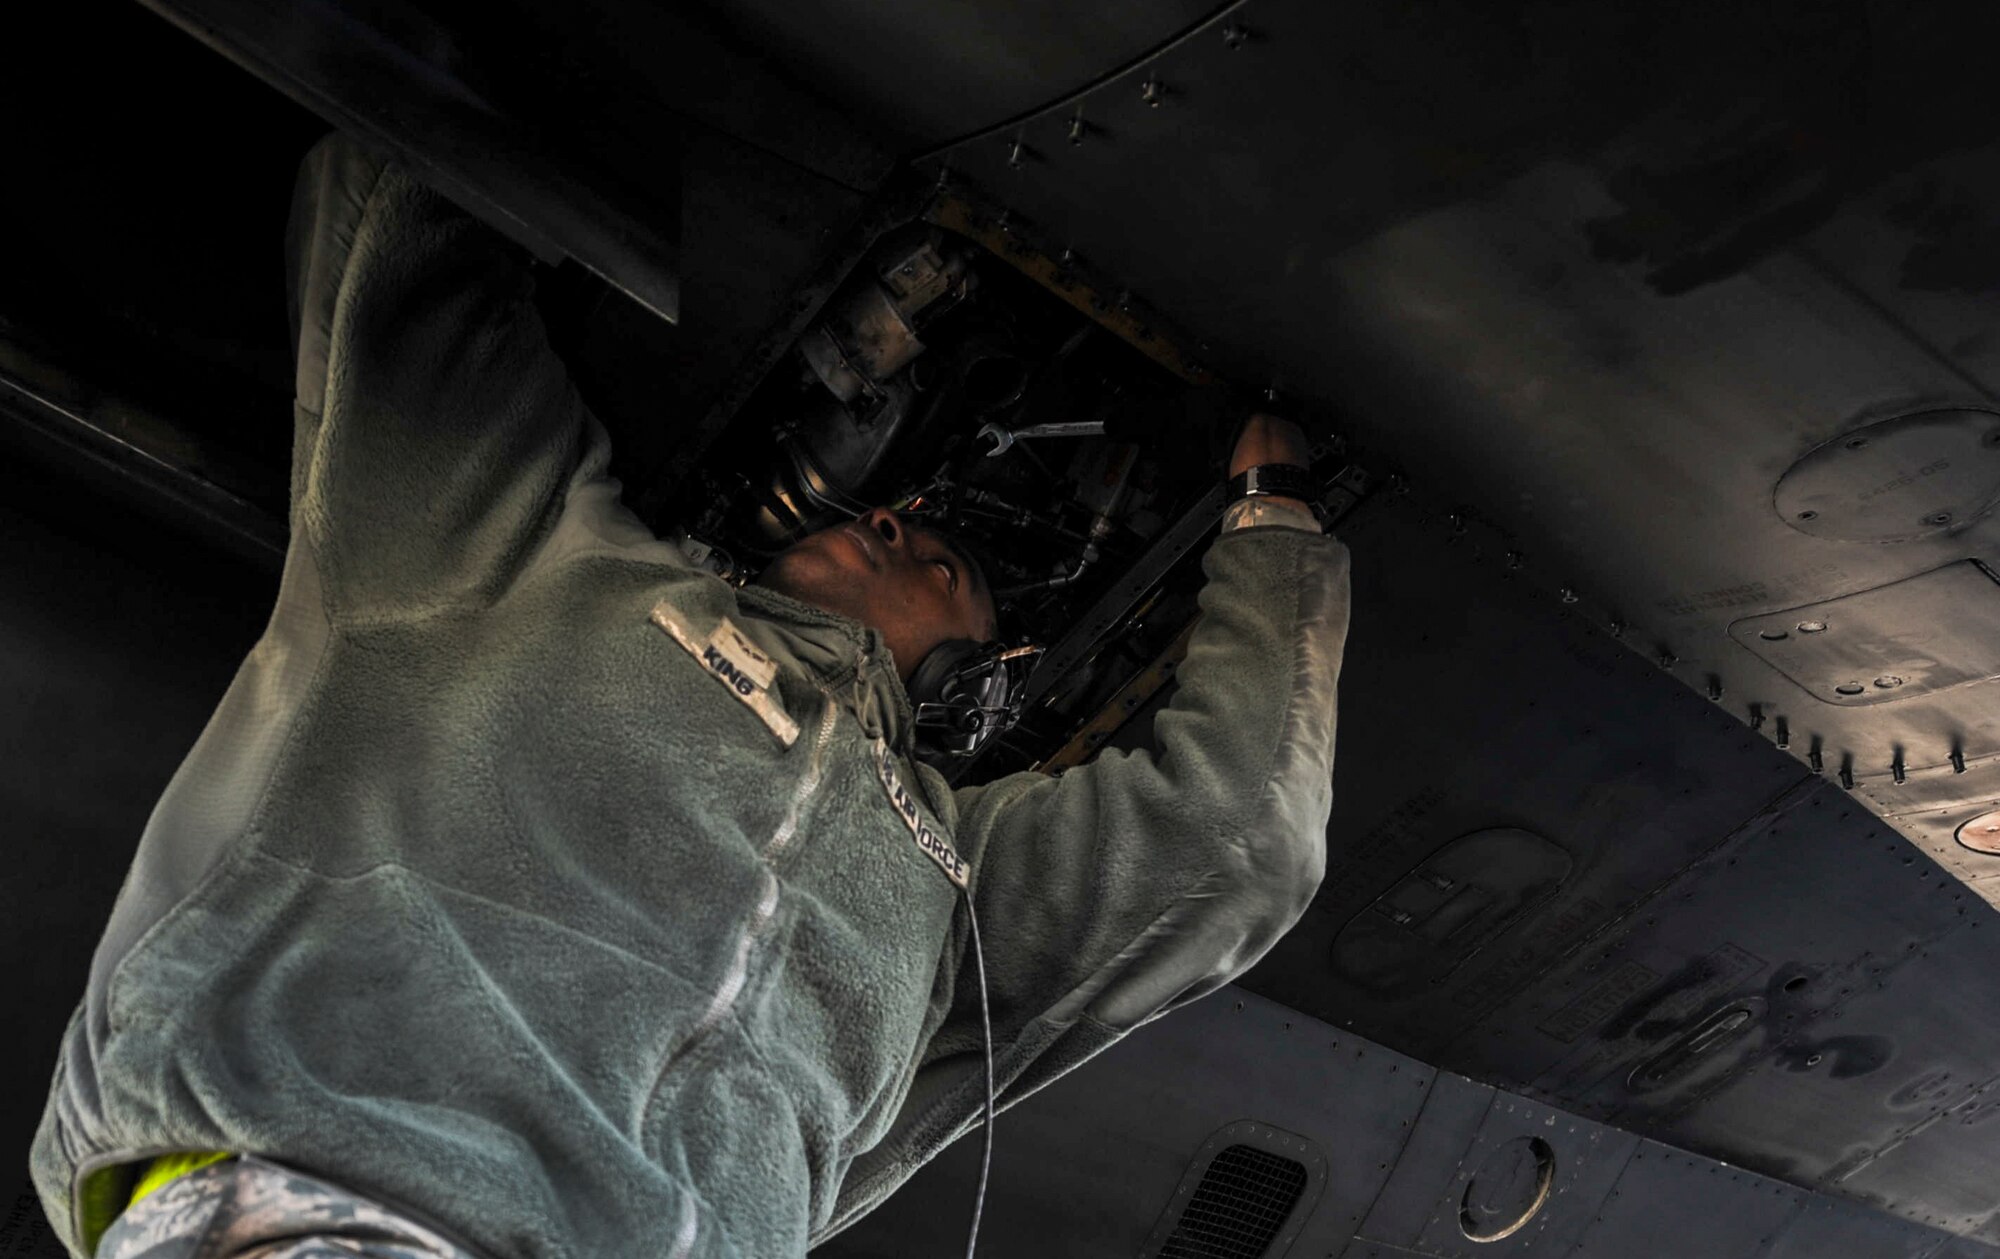 Airman 1st Class Jaylin King an aerospace propulsion apprentice assigned to the 28th Aircraft Maintenance Squadron, Ellsworth Air Force Base, S.D., works on a B-1B Lancer during Red Flag 17-1 on Nellis Air Force Base, Nev., Jan. 27, 2017. Aerospace Propulsion specialists test, maintain and repair all parts of the engine in order to keep the B-1b flying during the three week exercise. (U.S. Air Force photo by Airman 1st Class Kevin Tanenbaum/Released) 